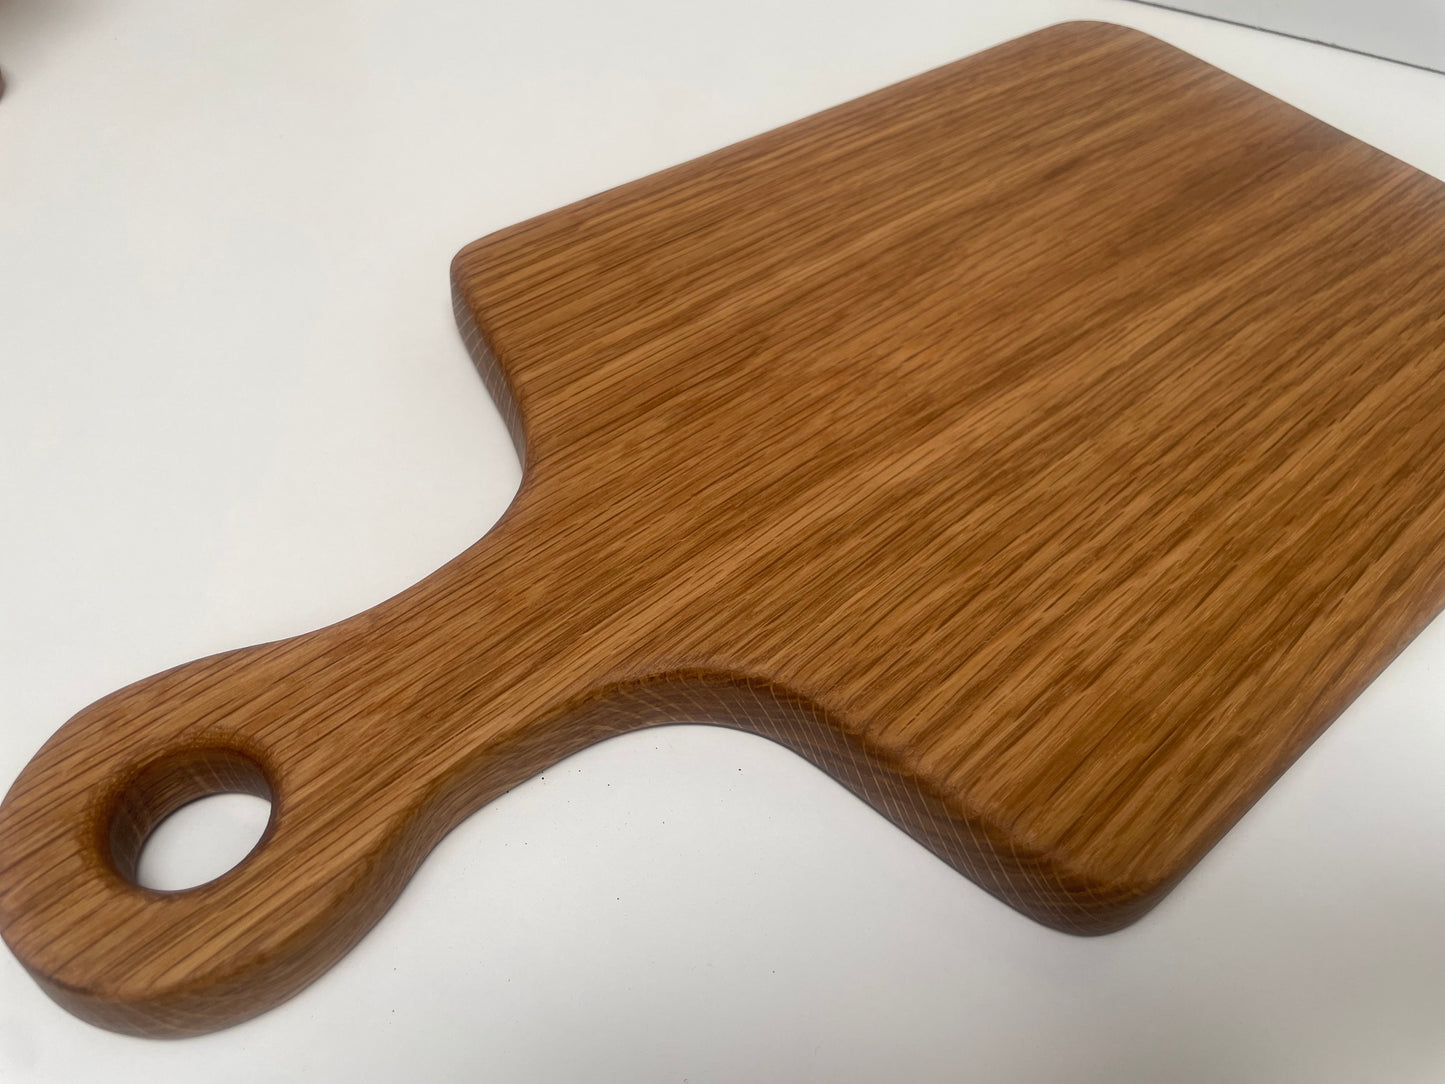 24H003 - Large Solid White Oak Handle Board